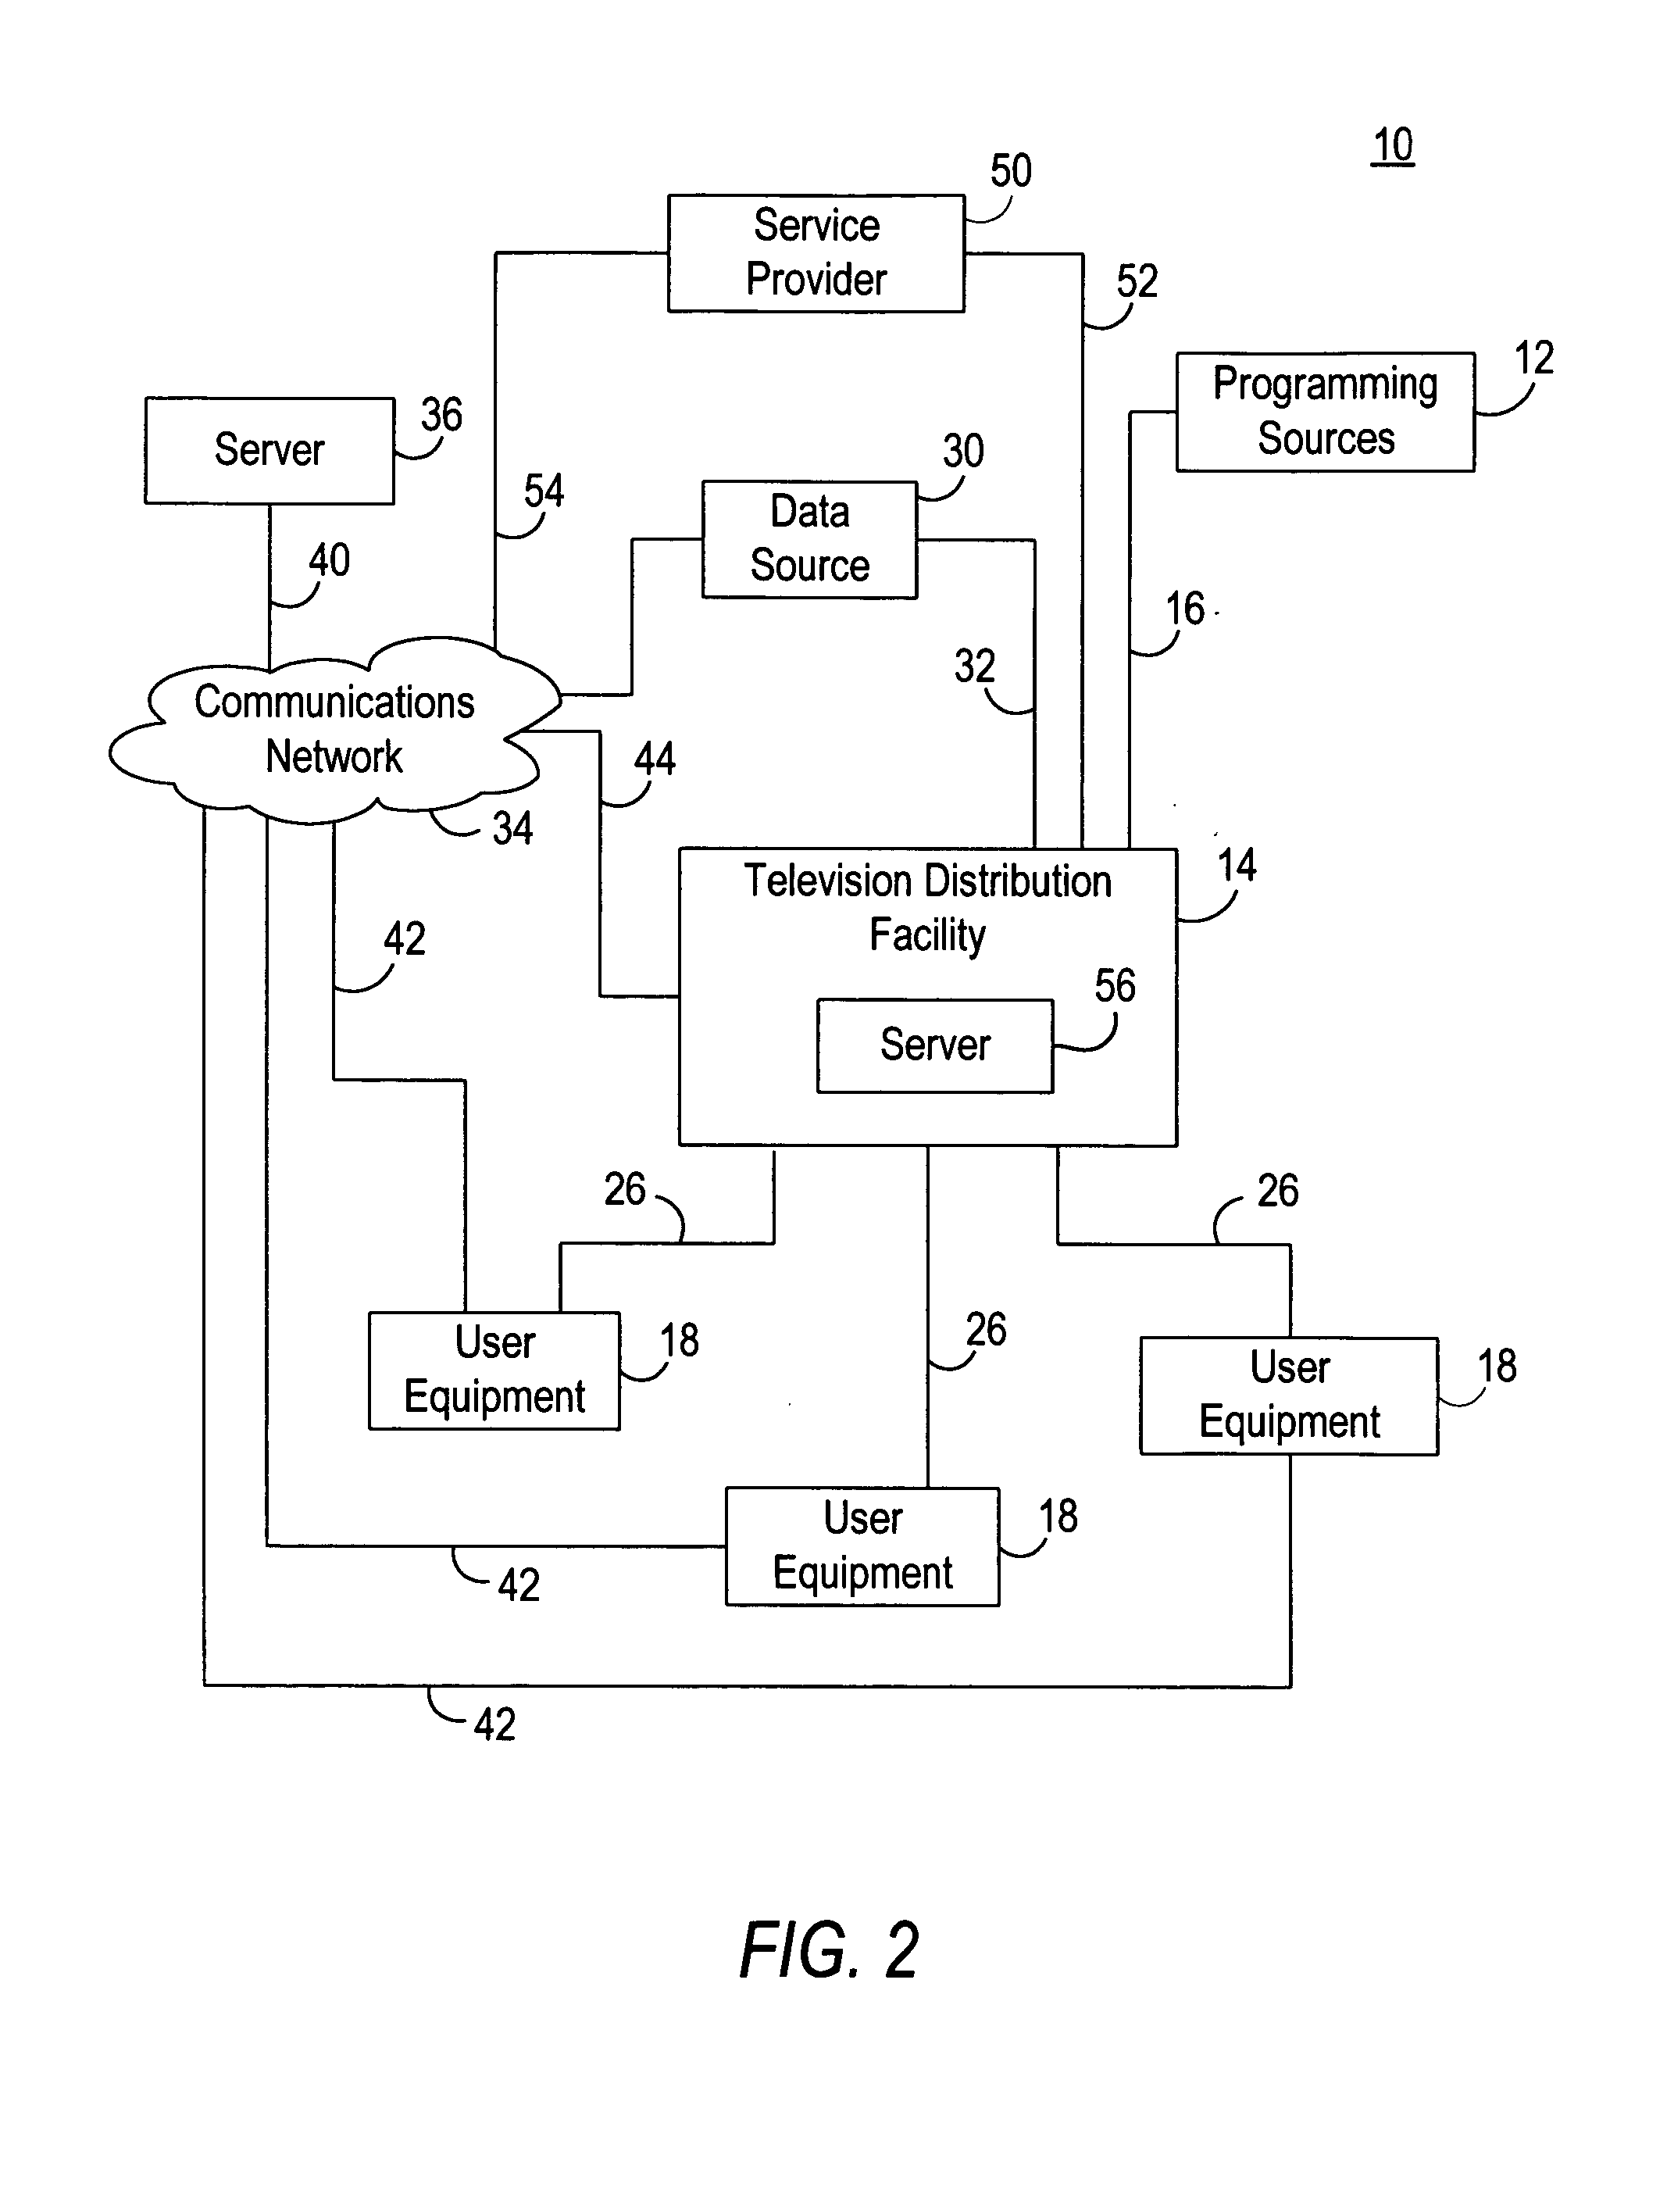 Systems and methods for providing real-time services in an interactive television program guide application